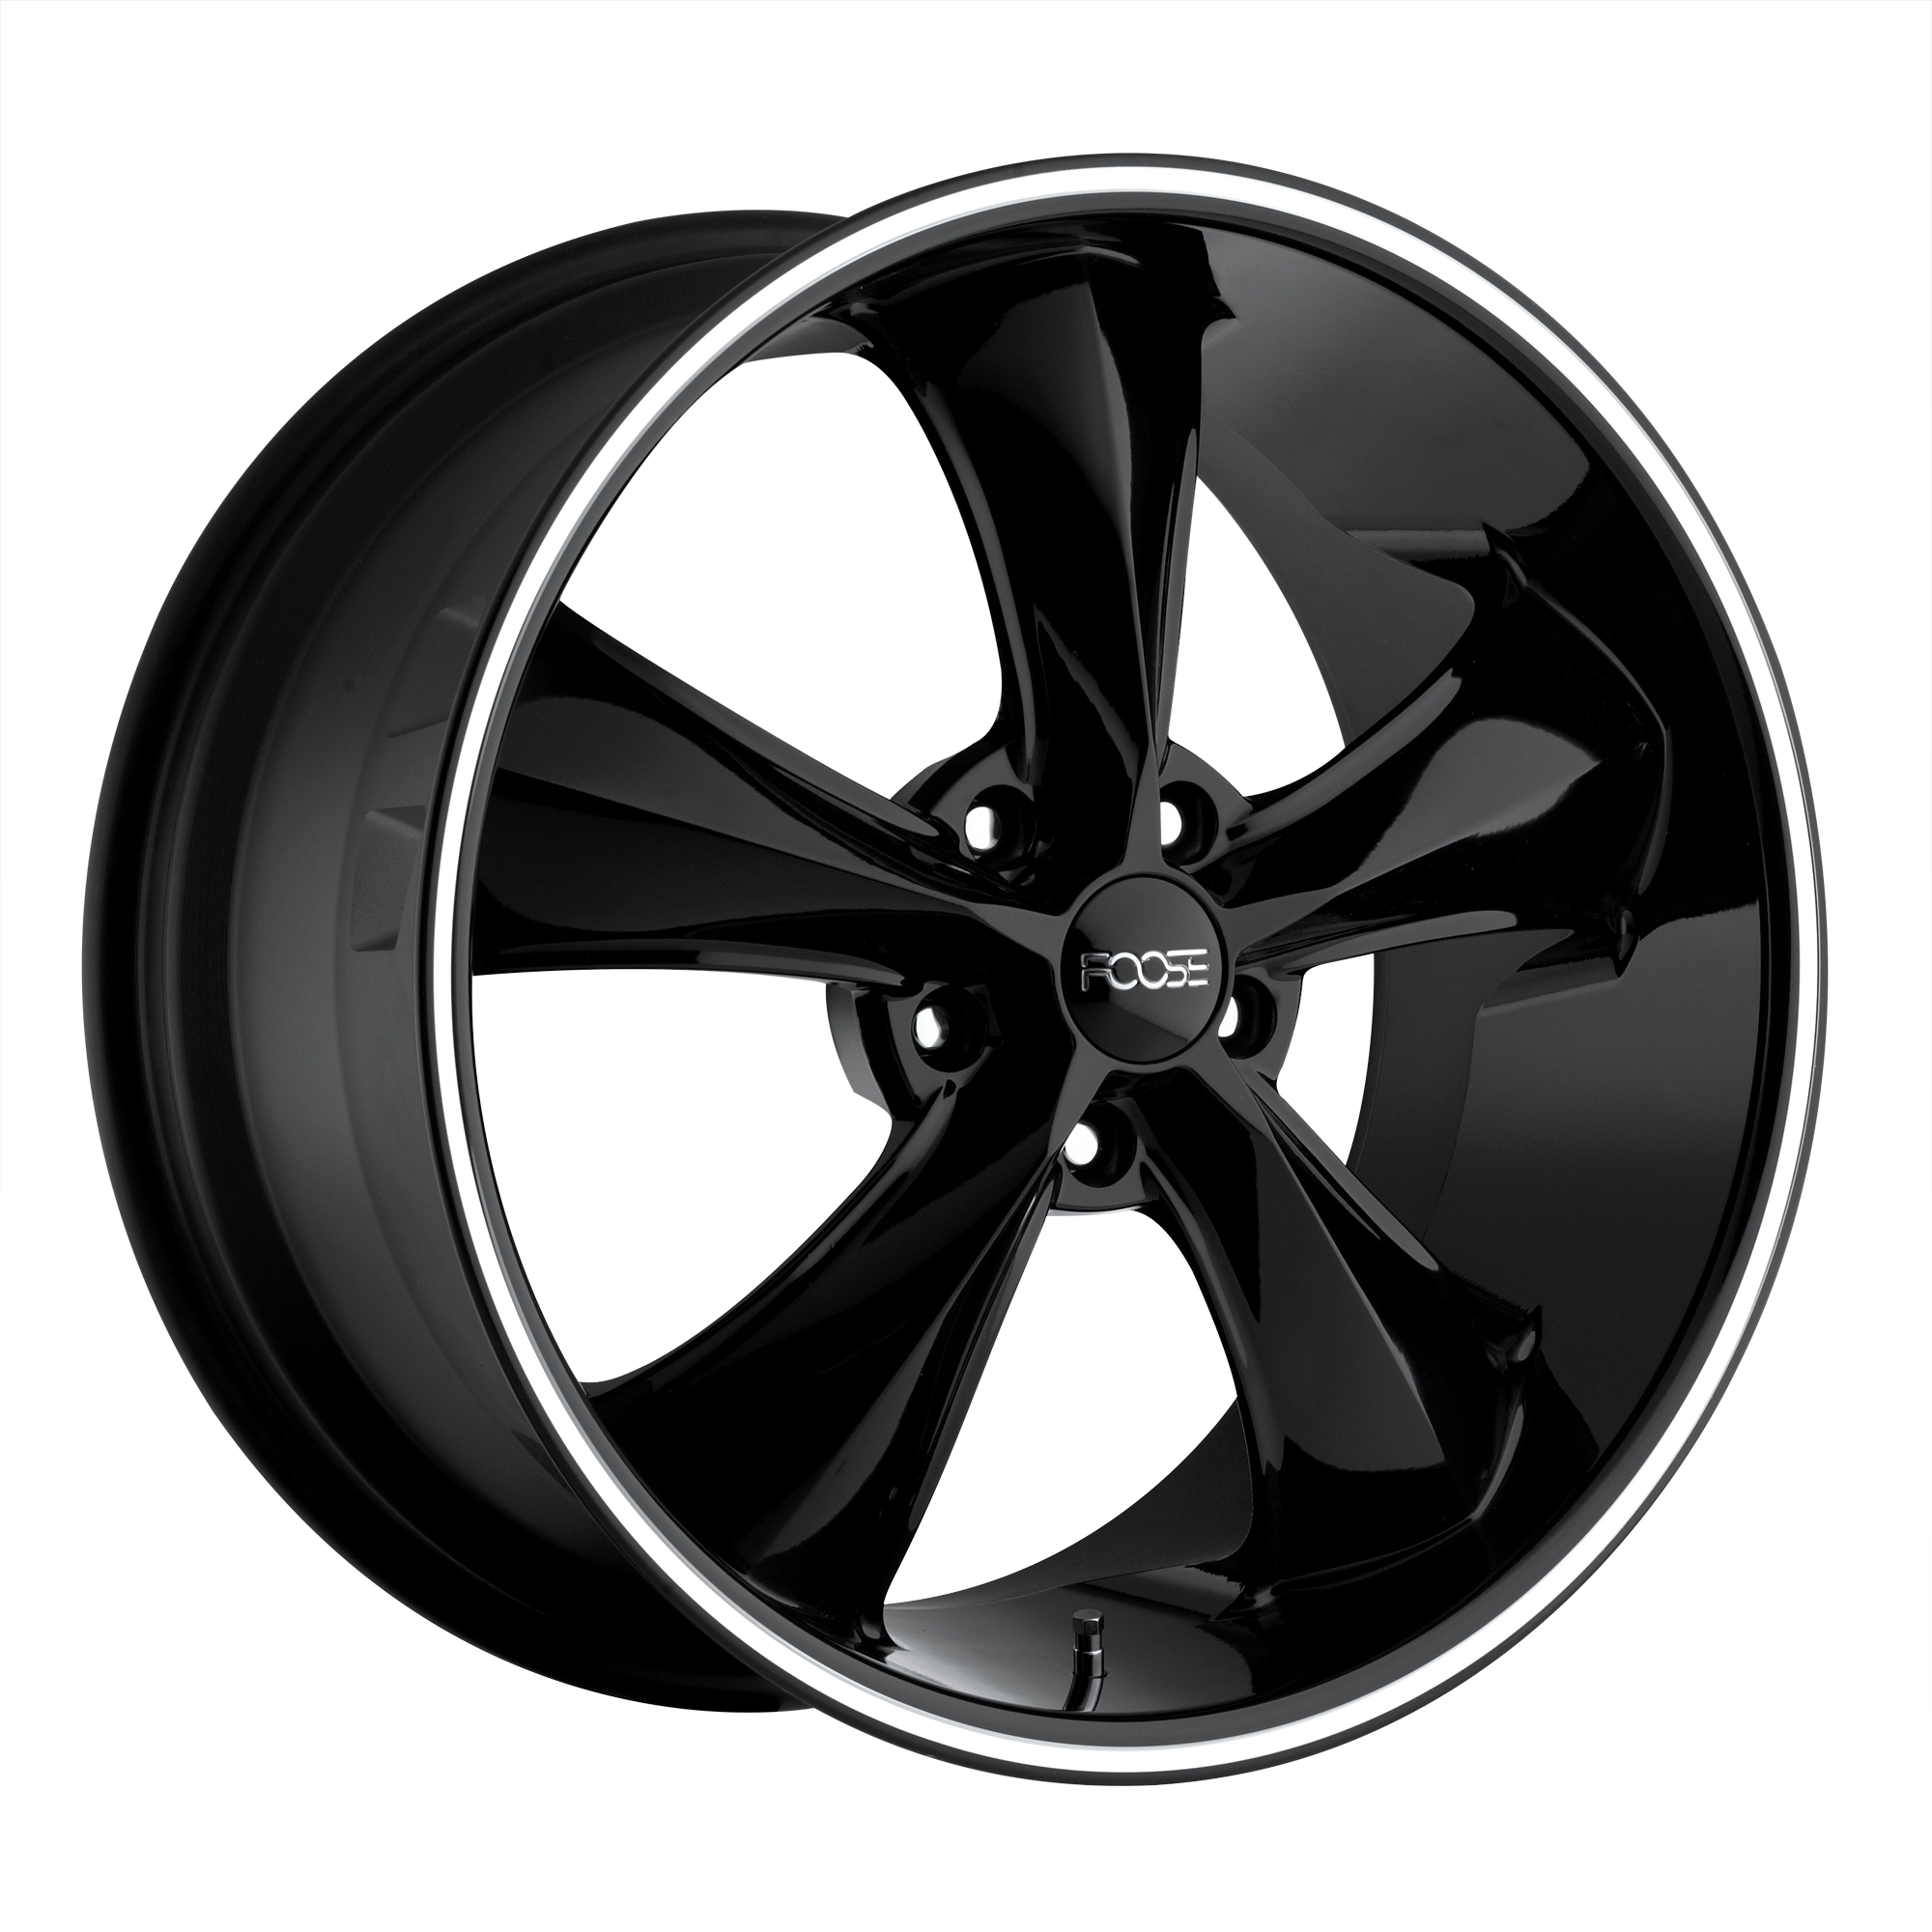 LEGEND 17x8 5x114.30 GLOSS BLACK MILLED (1 mm) - Tires and Engine Performance